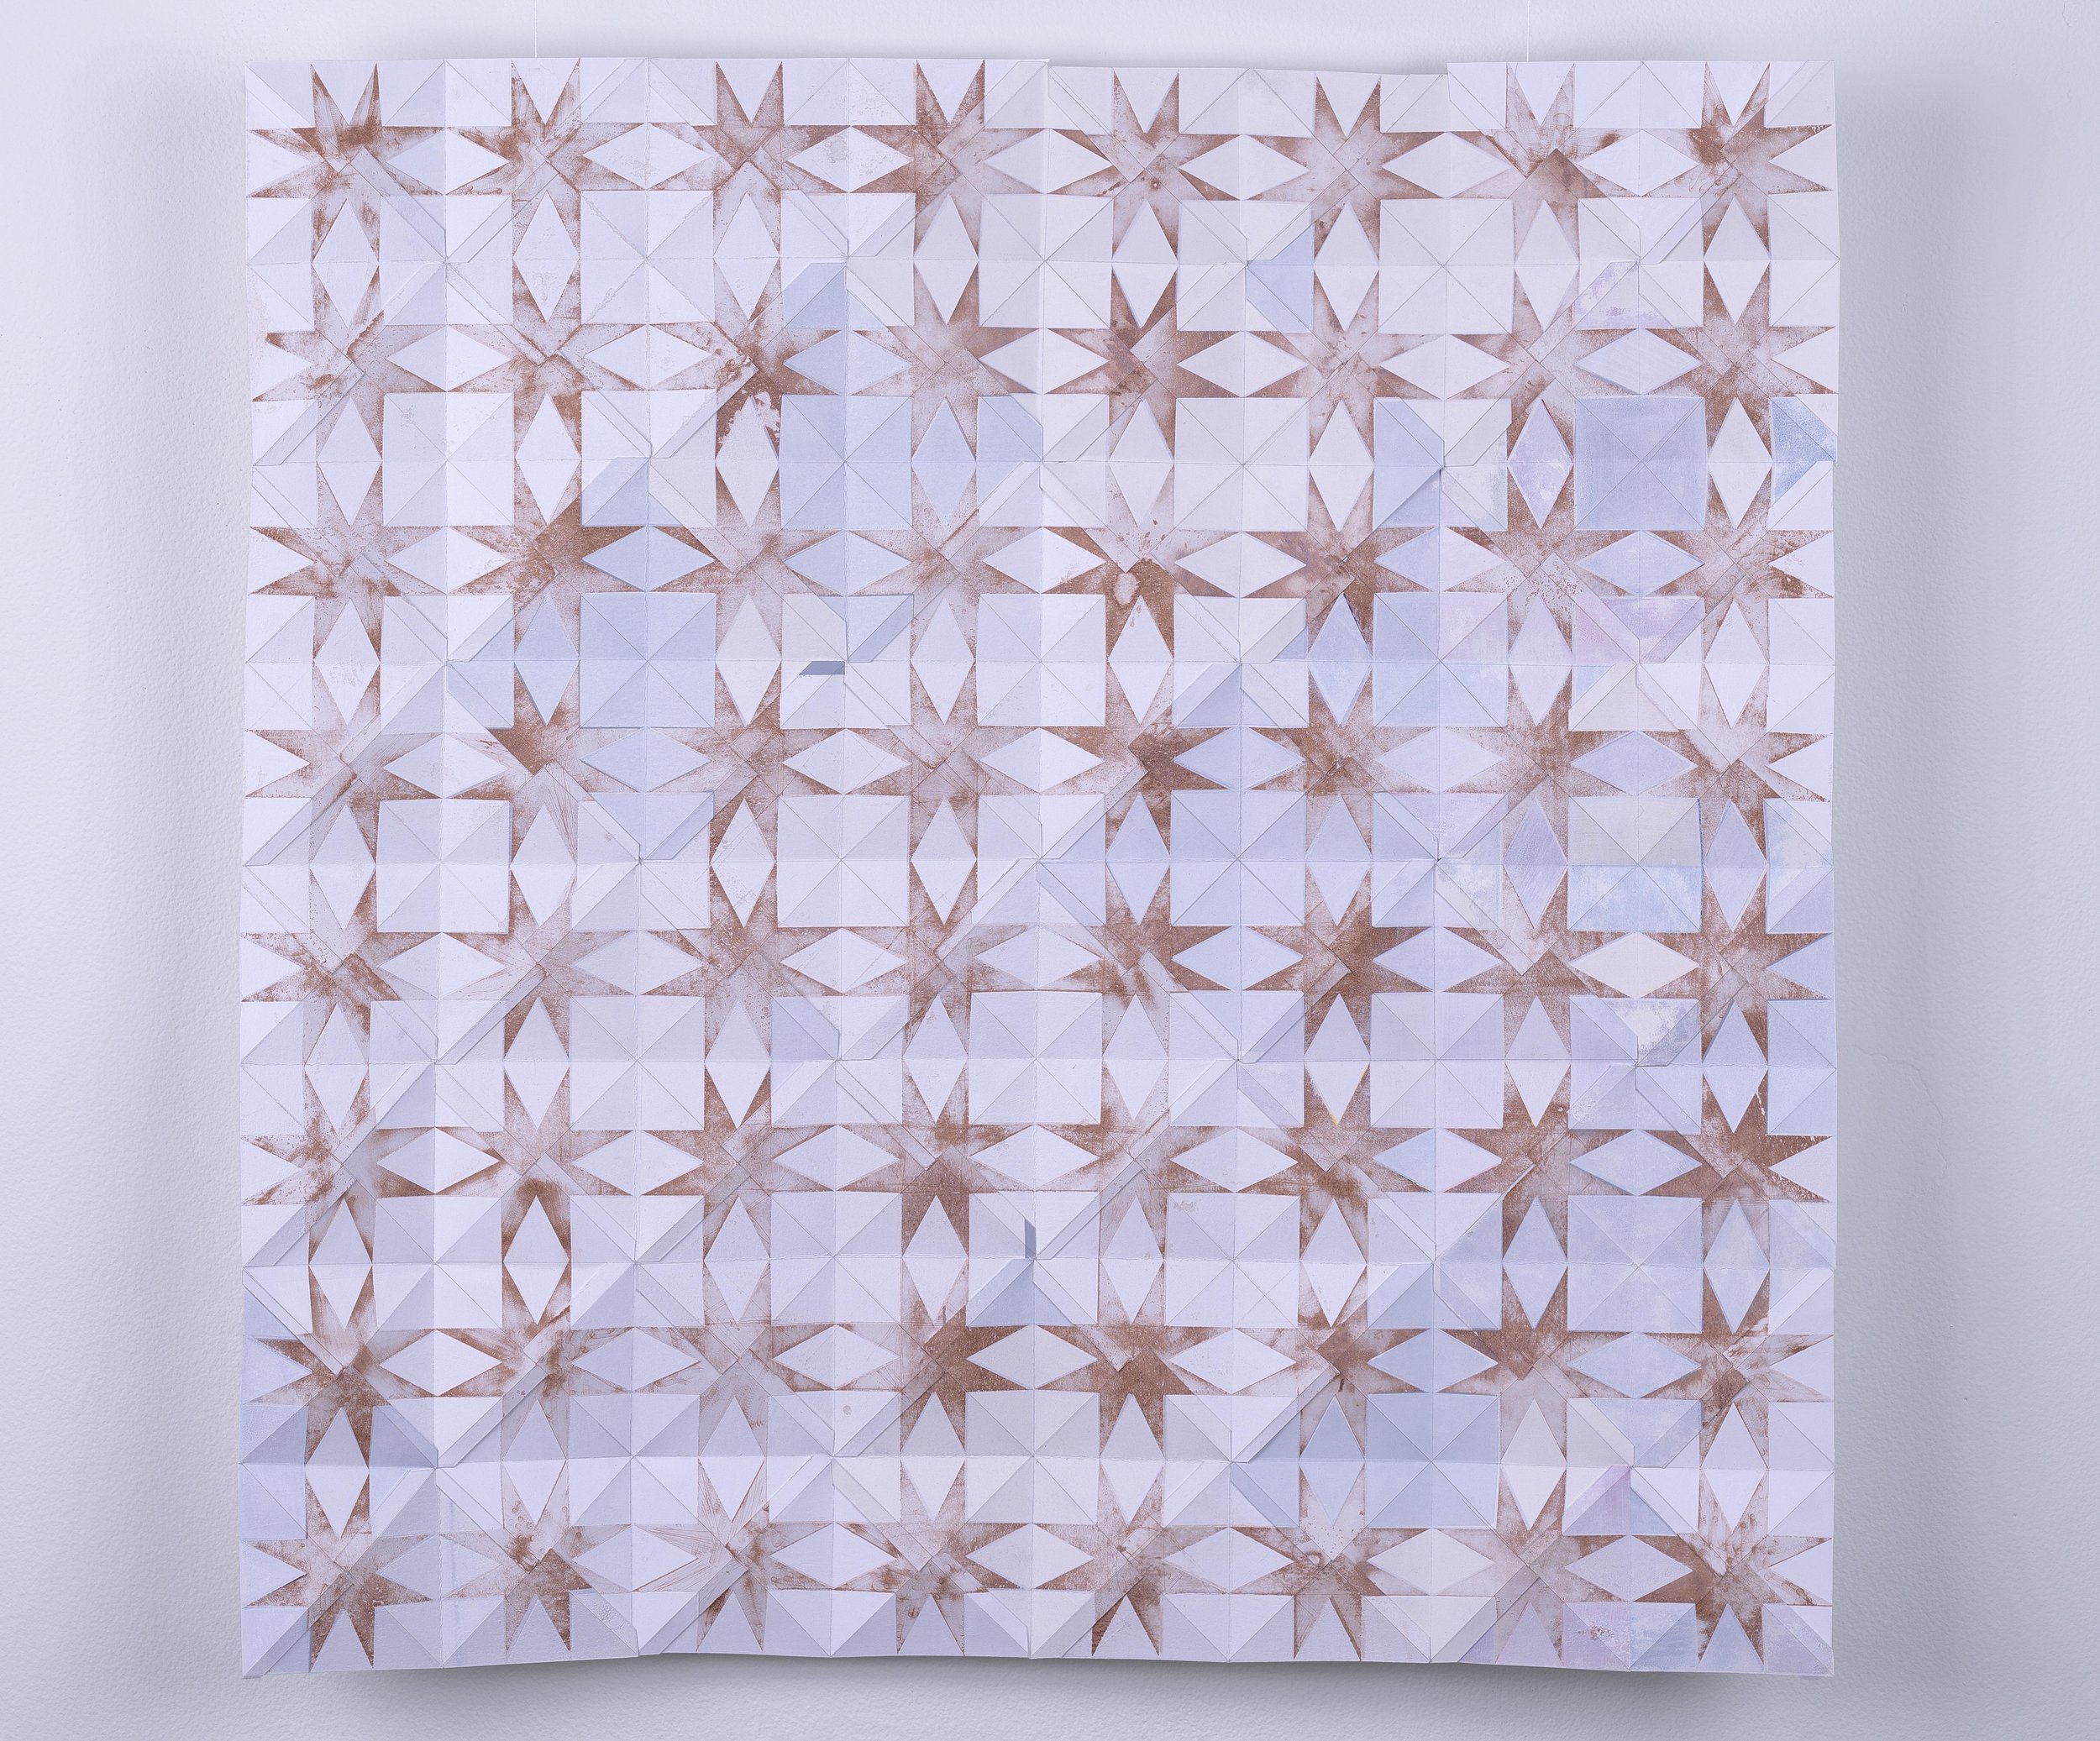 Folded 8-Point Star Quilt